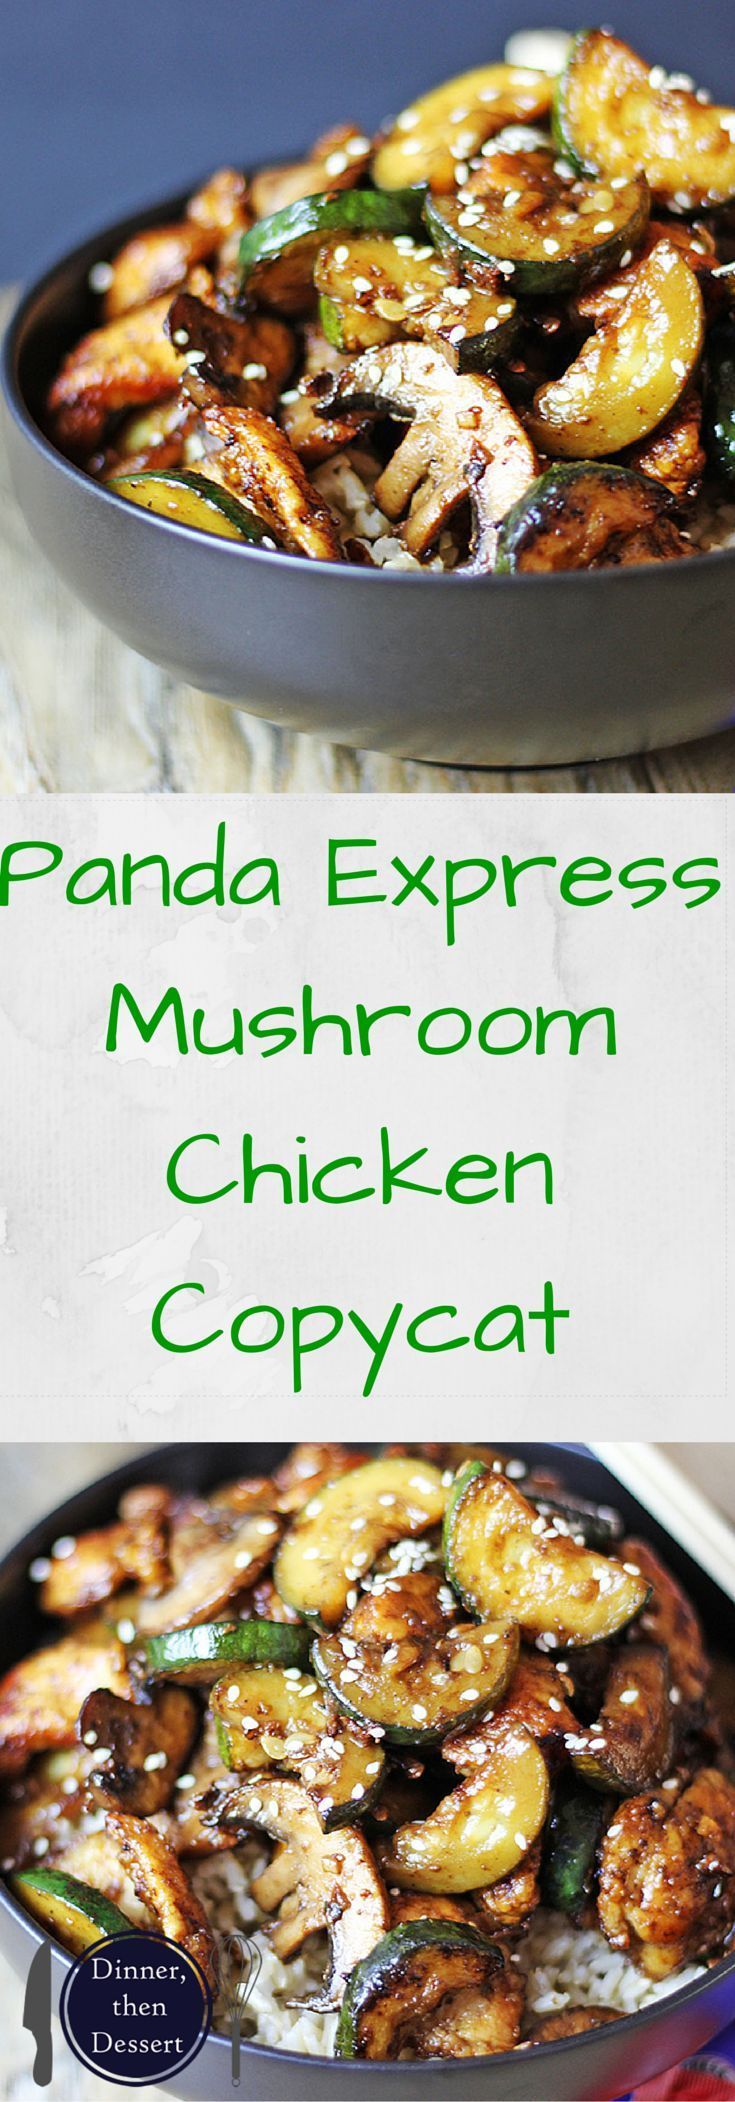 Panda Express Zucchini and Mushroom Chicken in just 20 minutes! Youll be sitting down to dinner faster than you could drive there